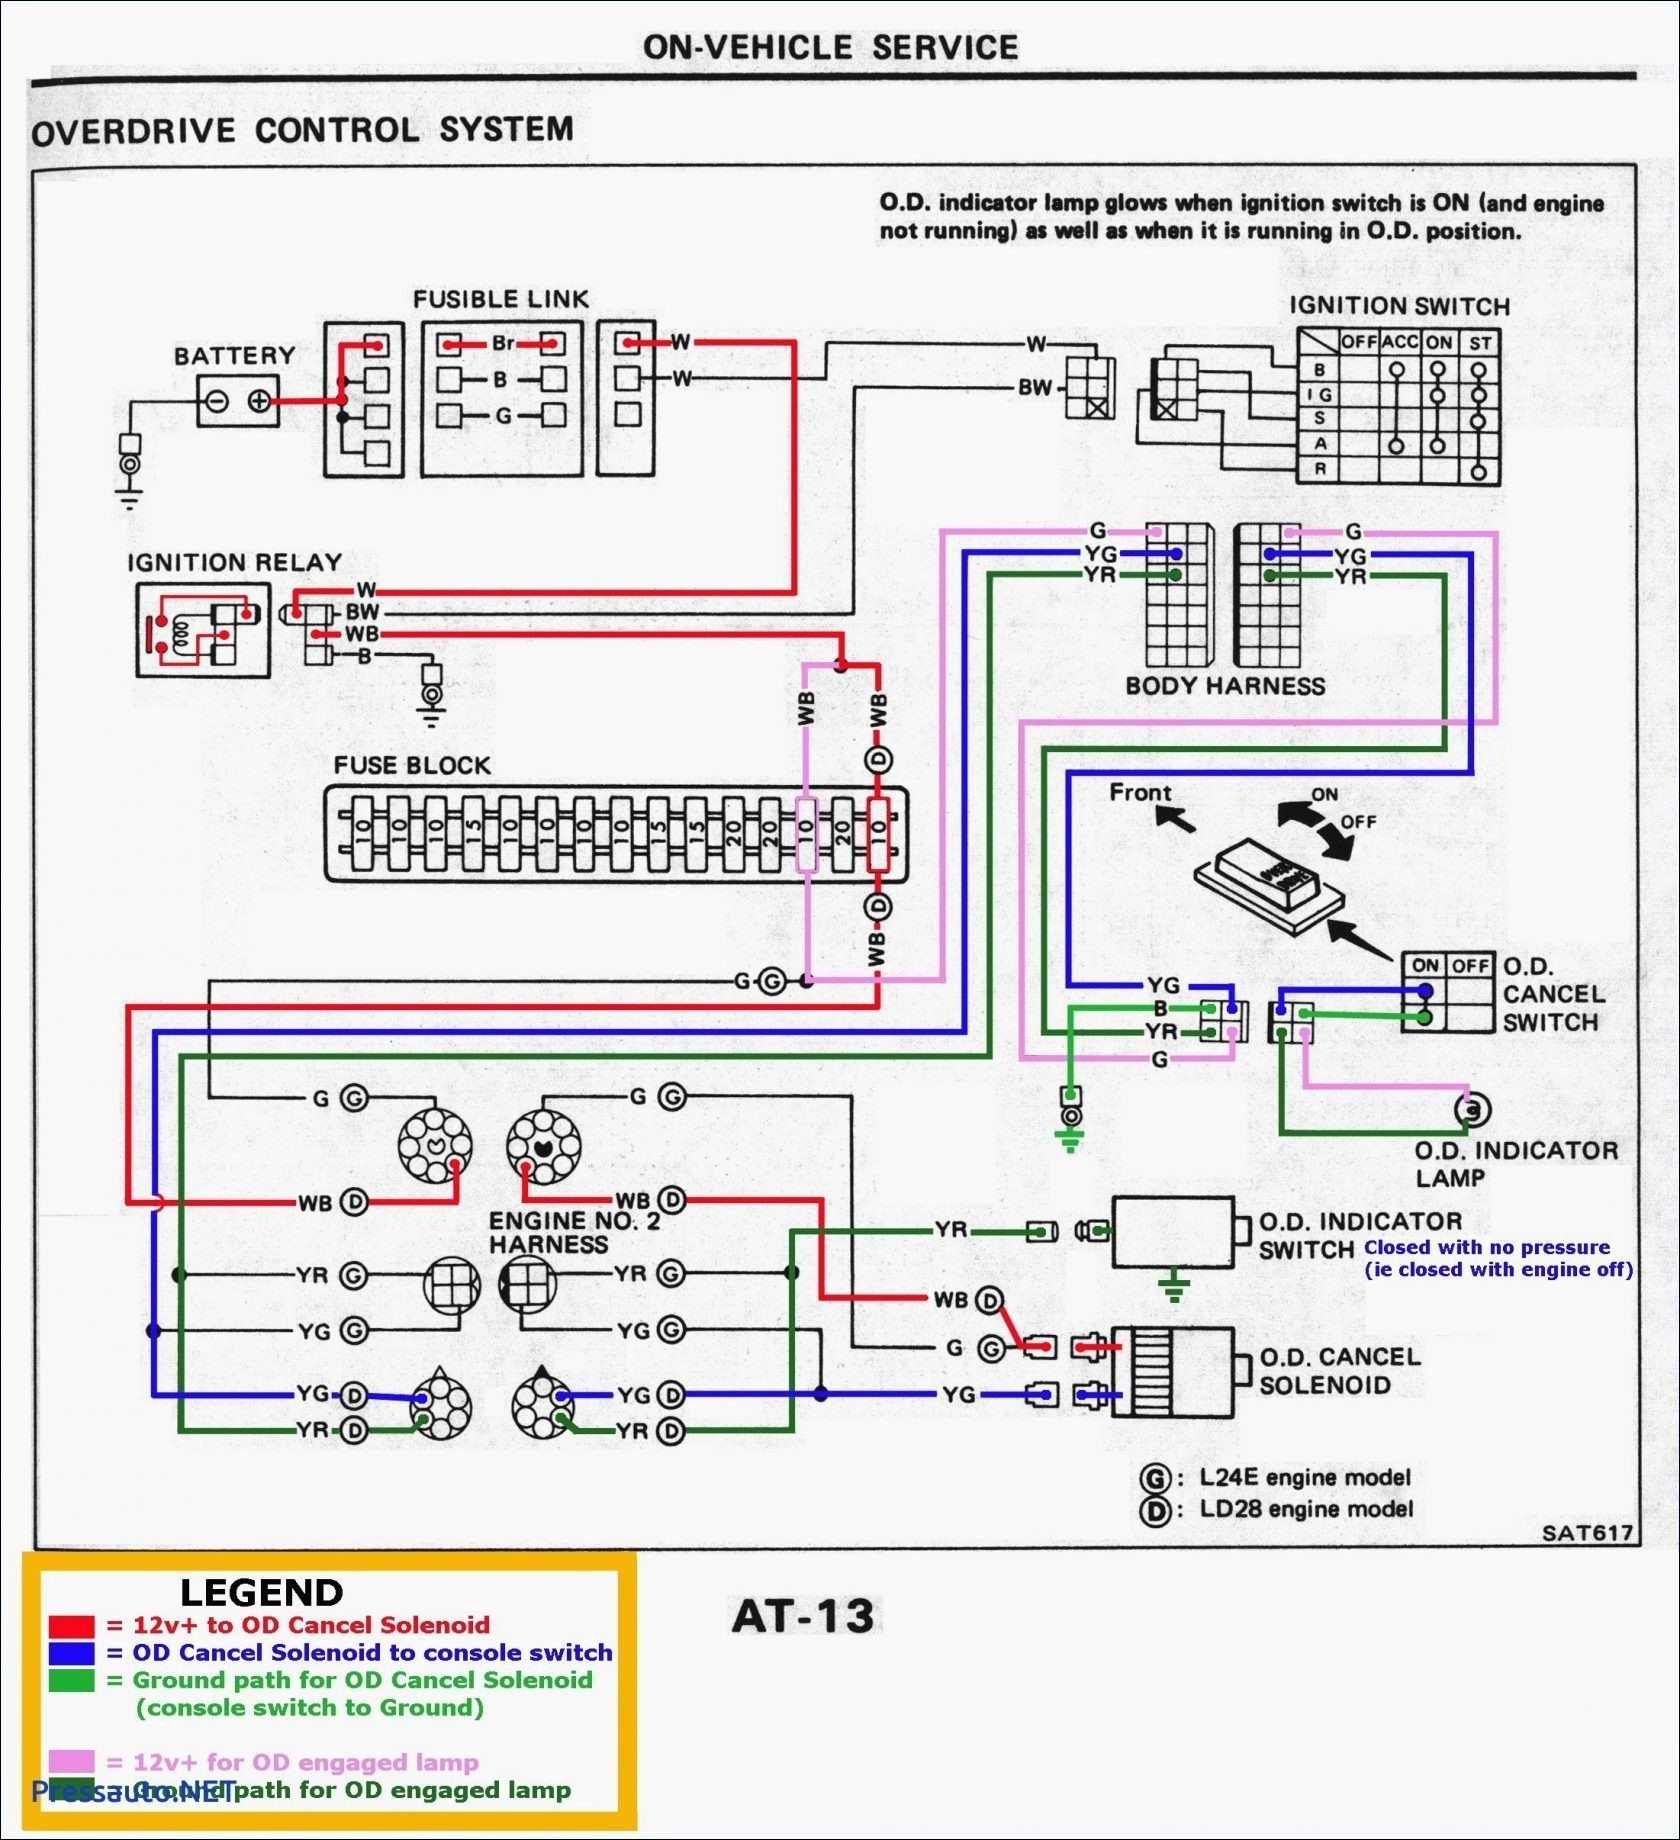 Wiring Diagram for Fog Light Switch New Wiring Diagrams for Lights In A Series Fresh Fan